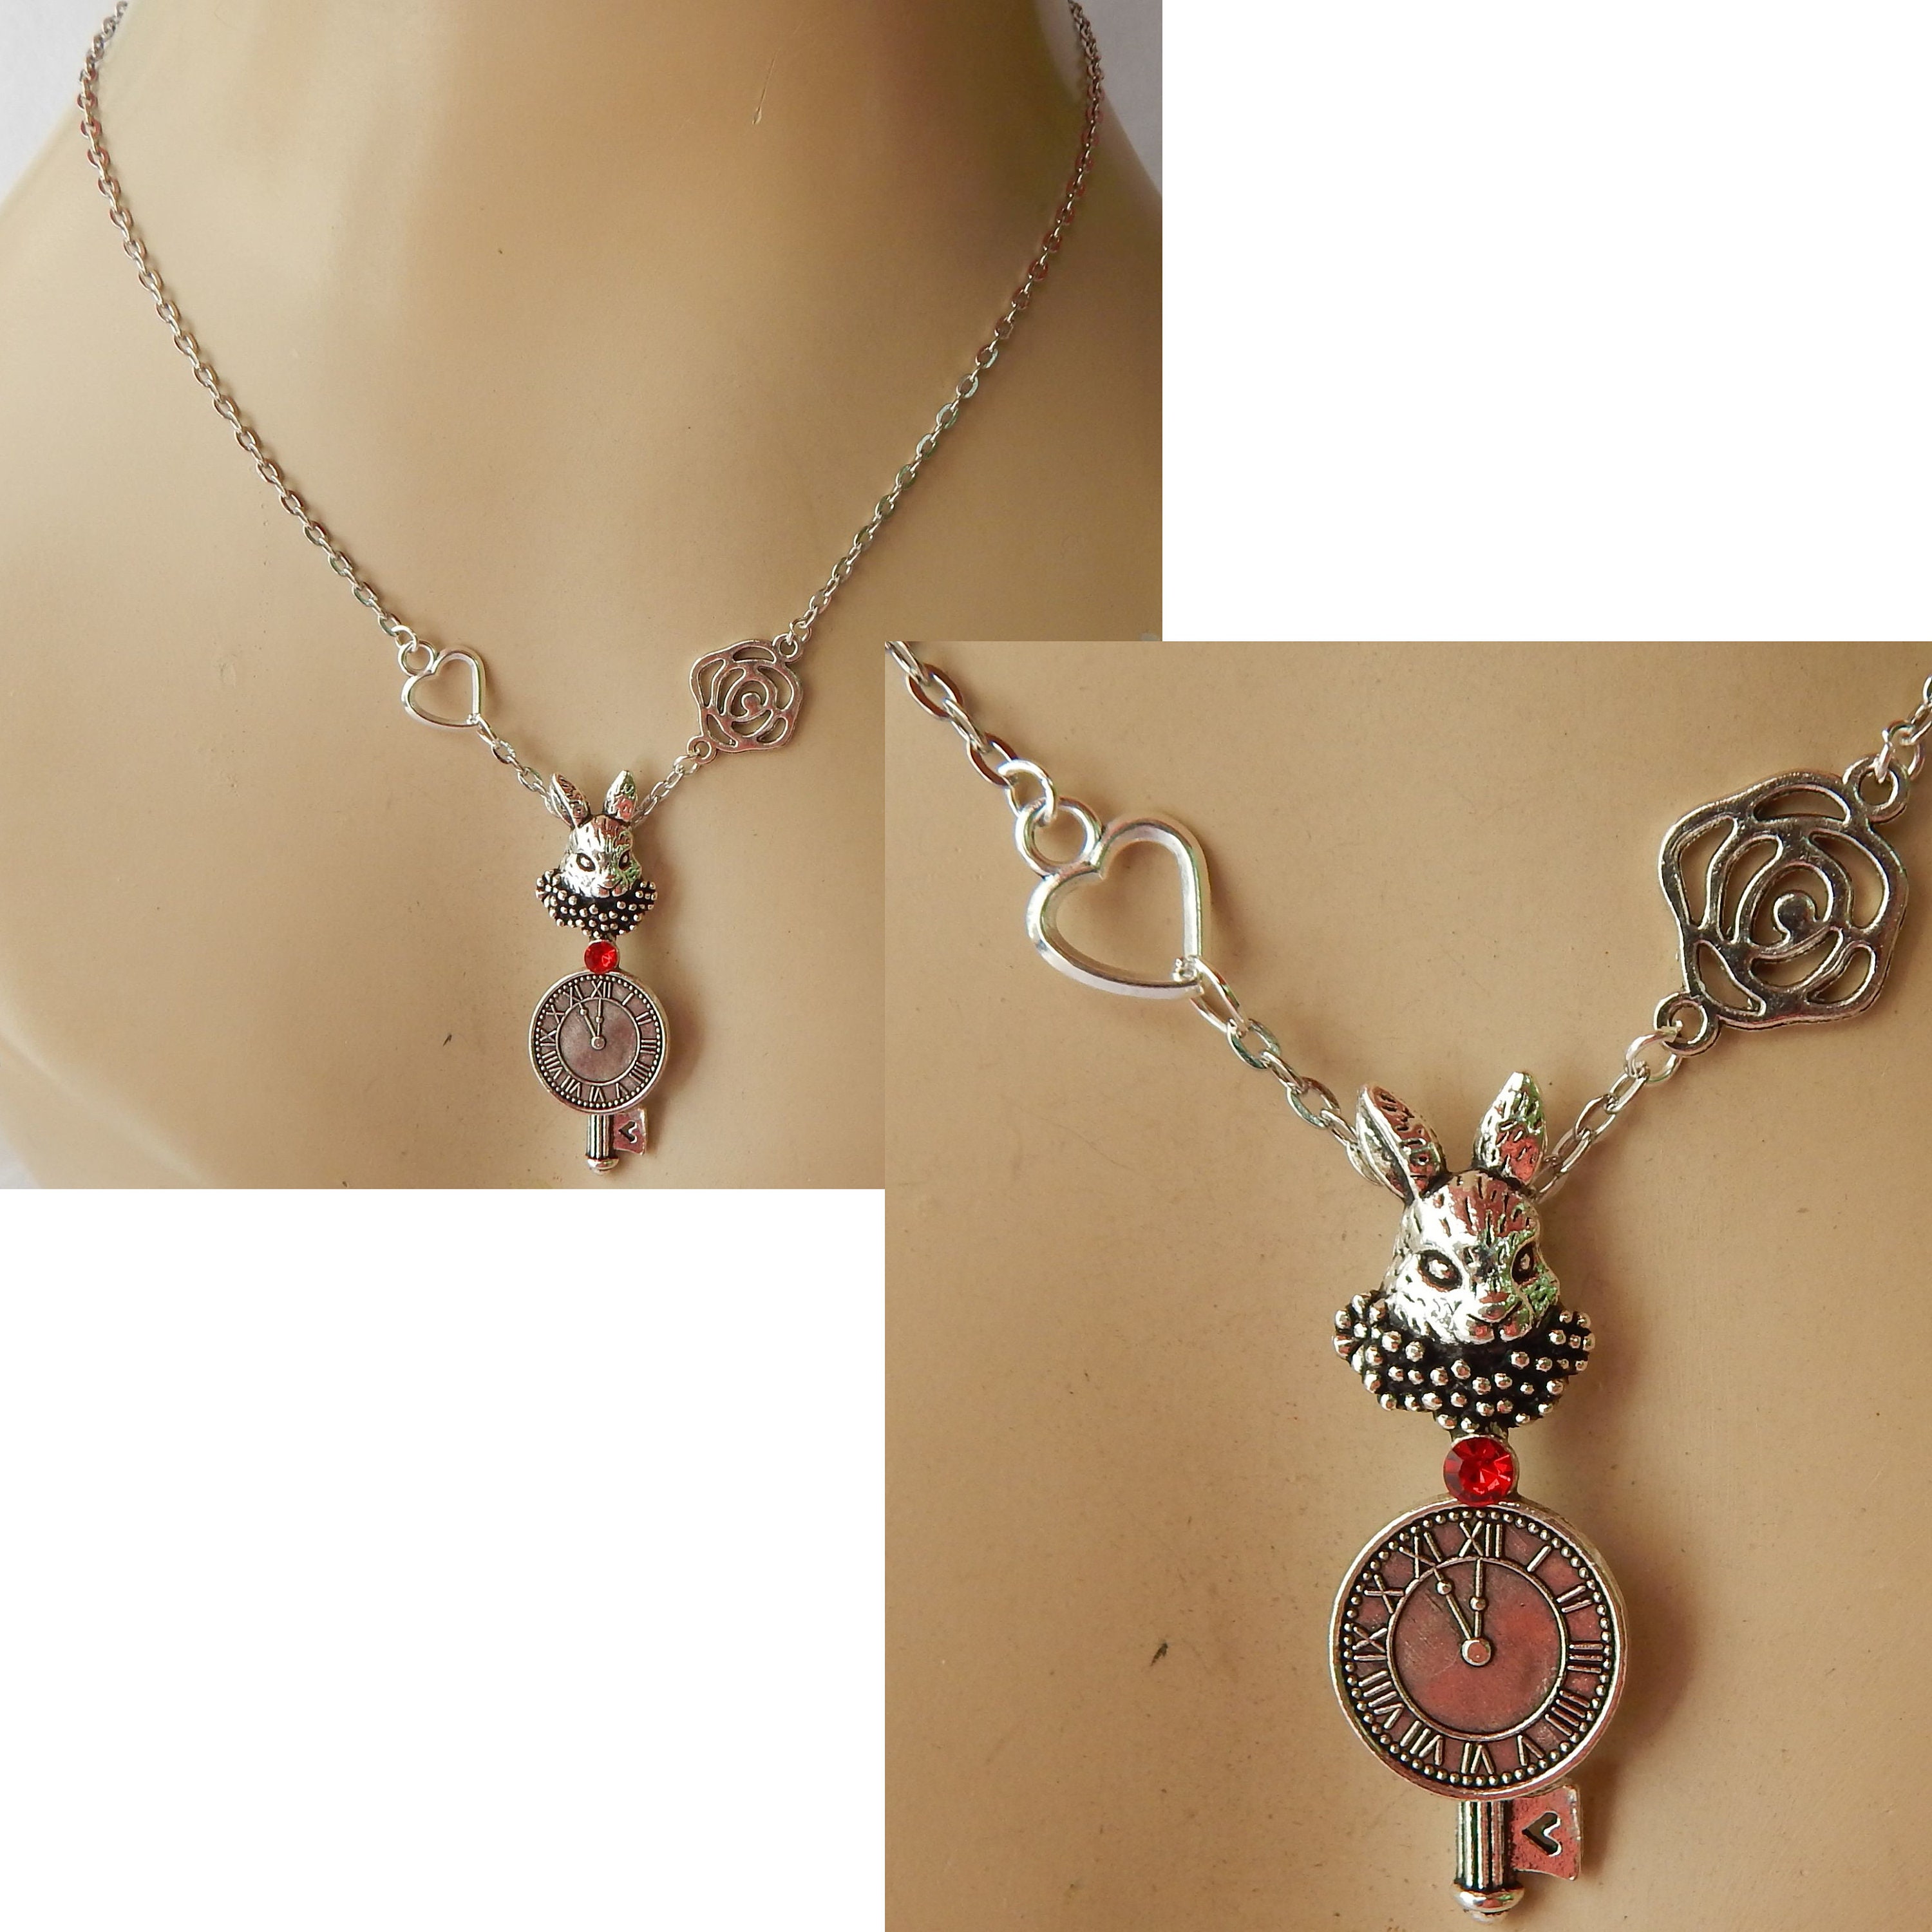 Details about   Alice in Wonderland White Rabbit Fantasy Silver Pendant 24" Chain Necklace 